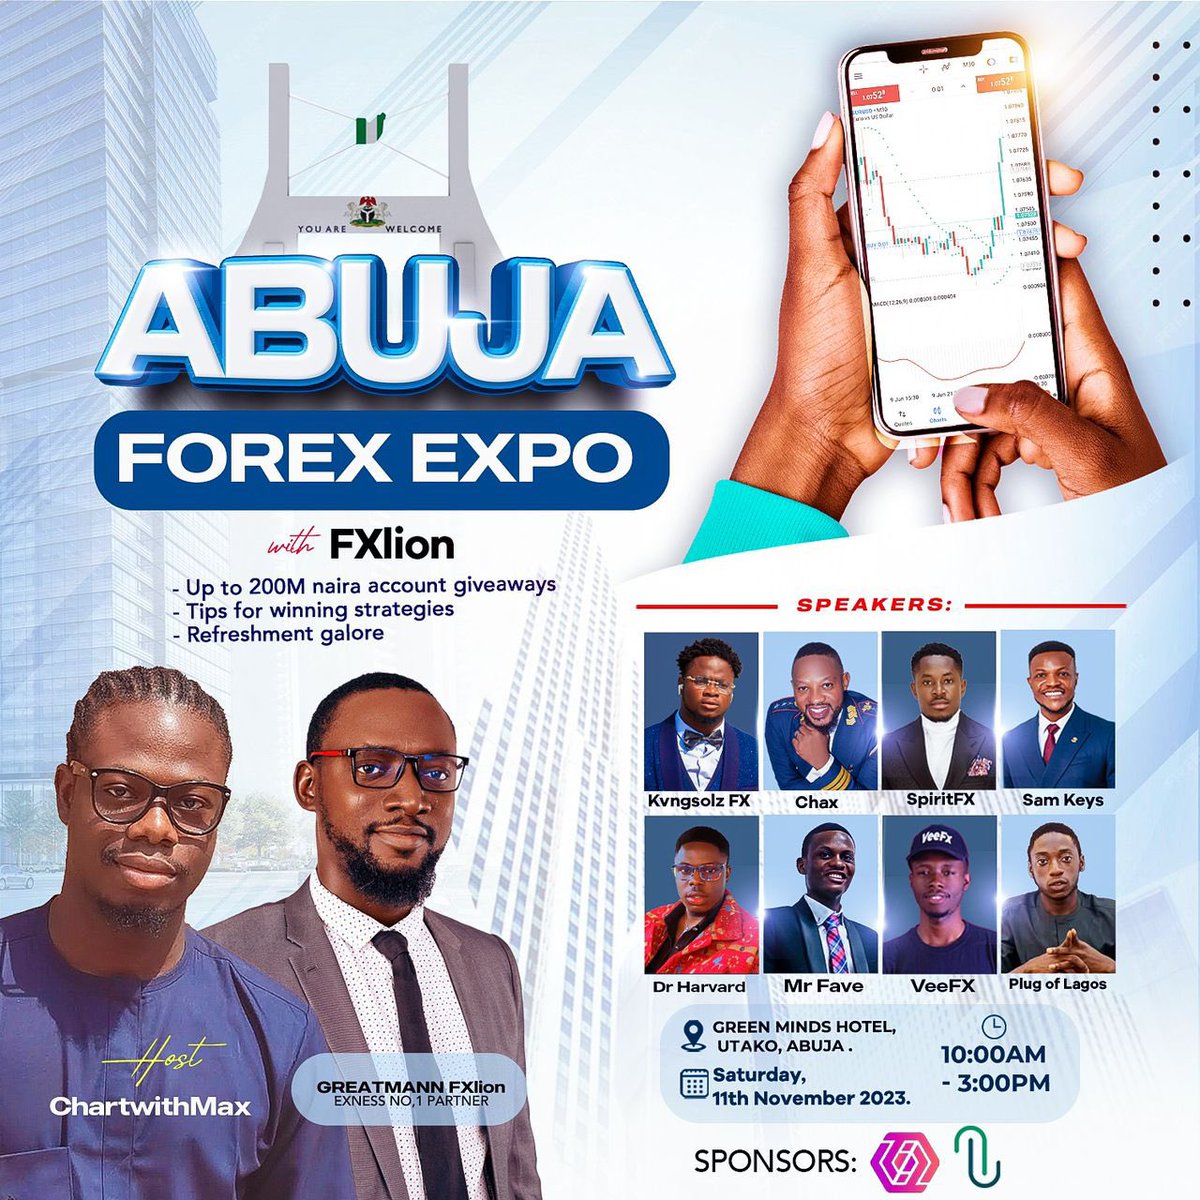 DONT MISS THIS EVENT IF YOU ARE IN ABUJA! signup to book your seat! bit.ly/AFE-veefx